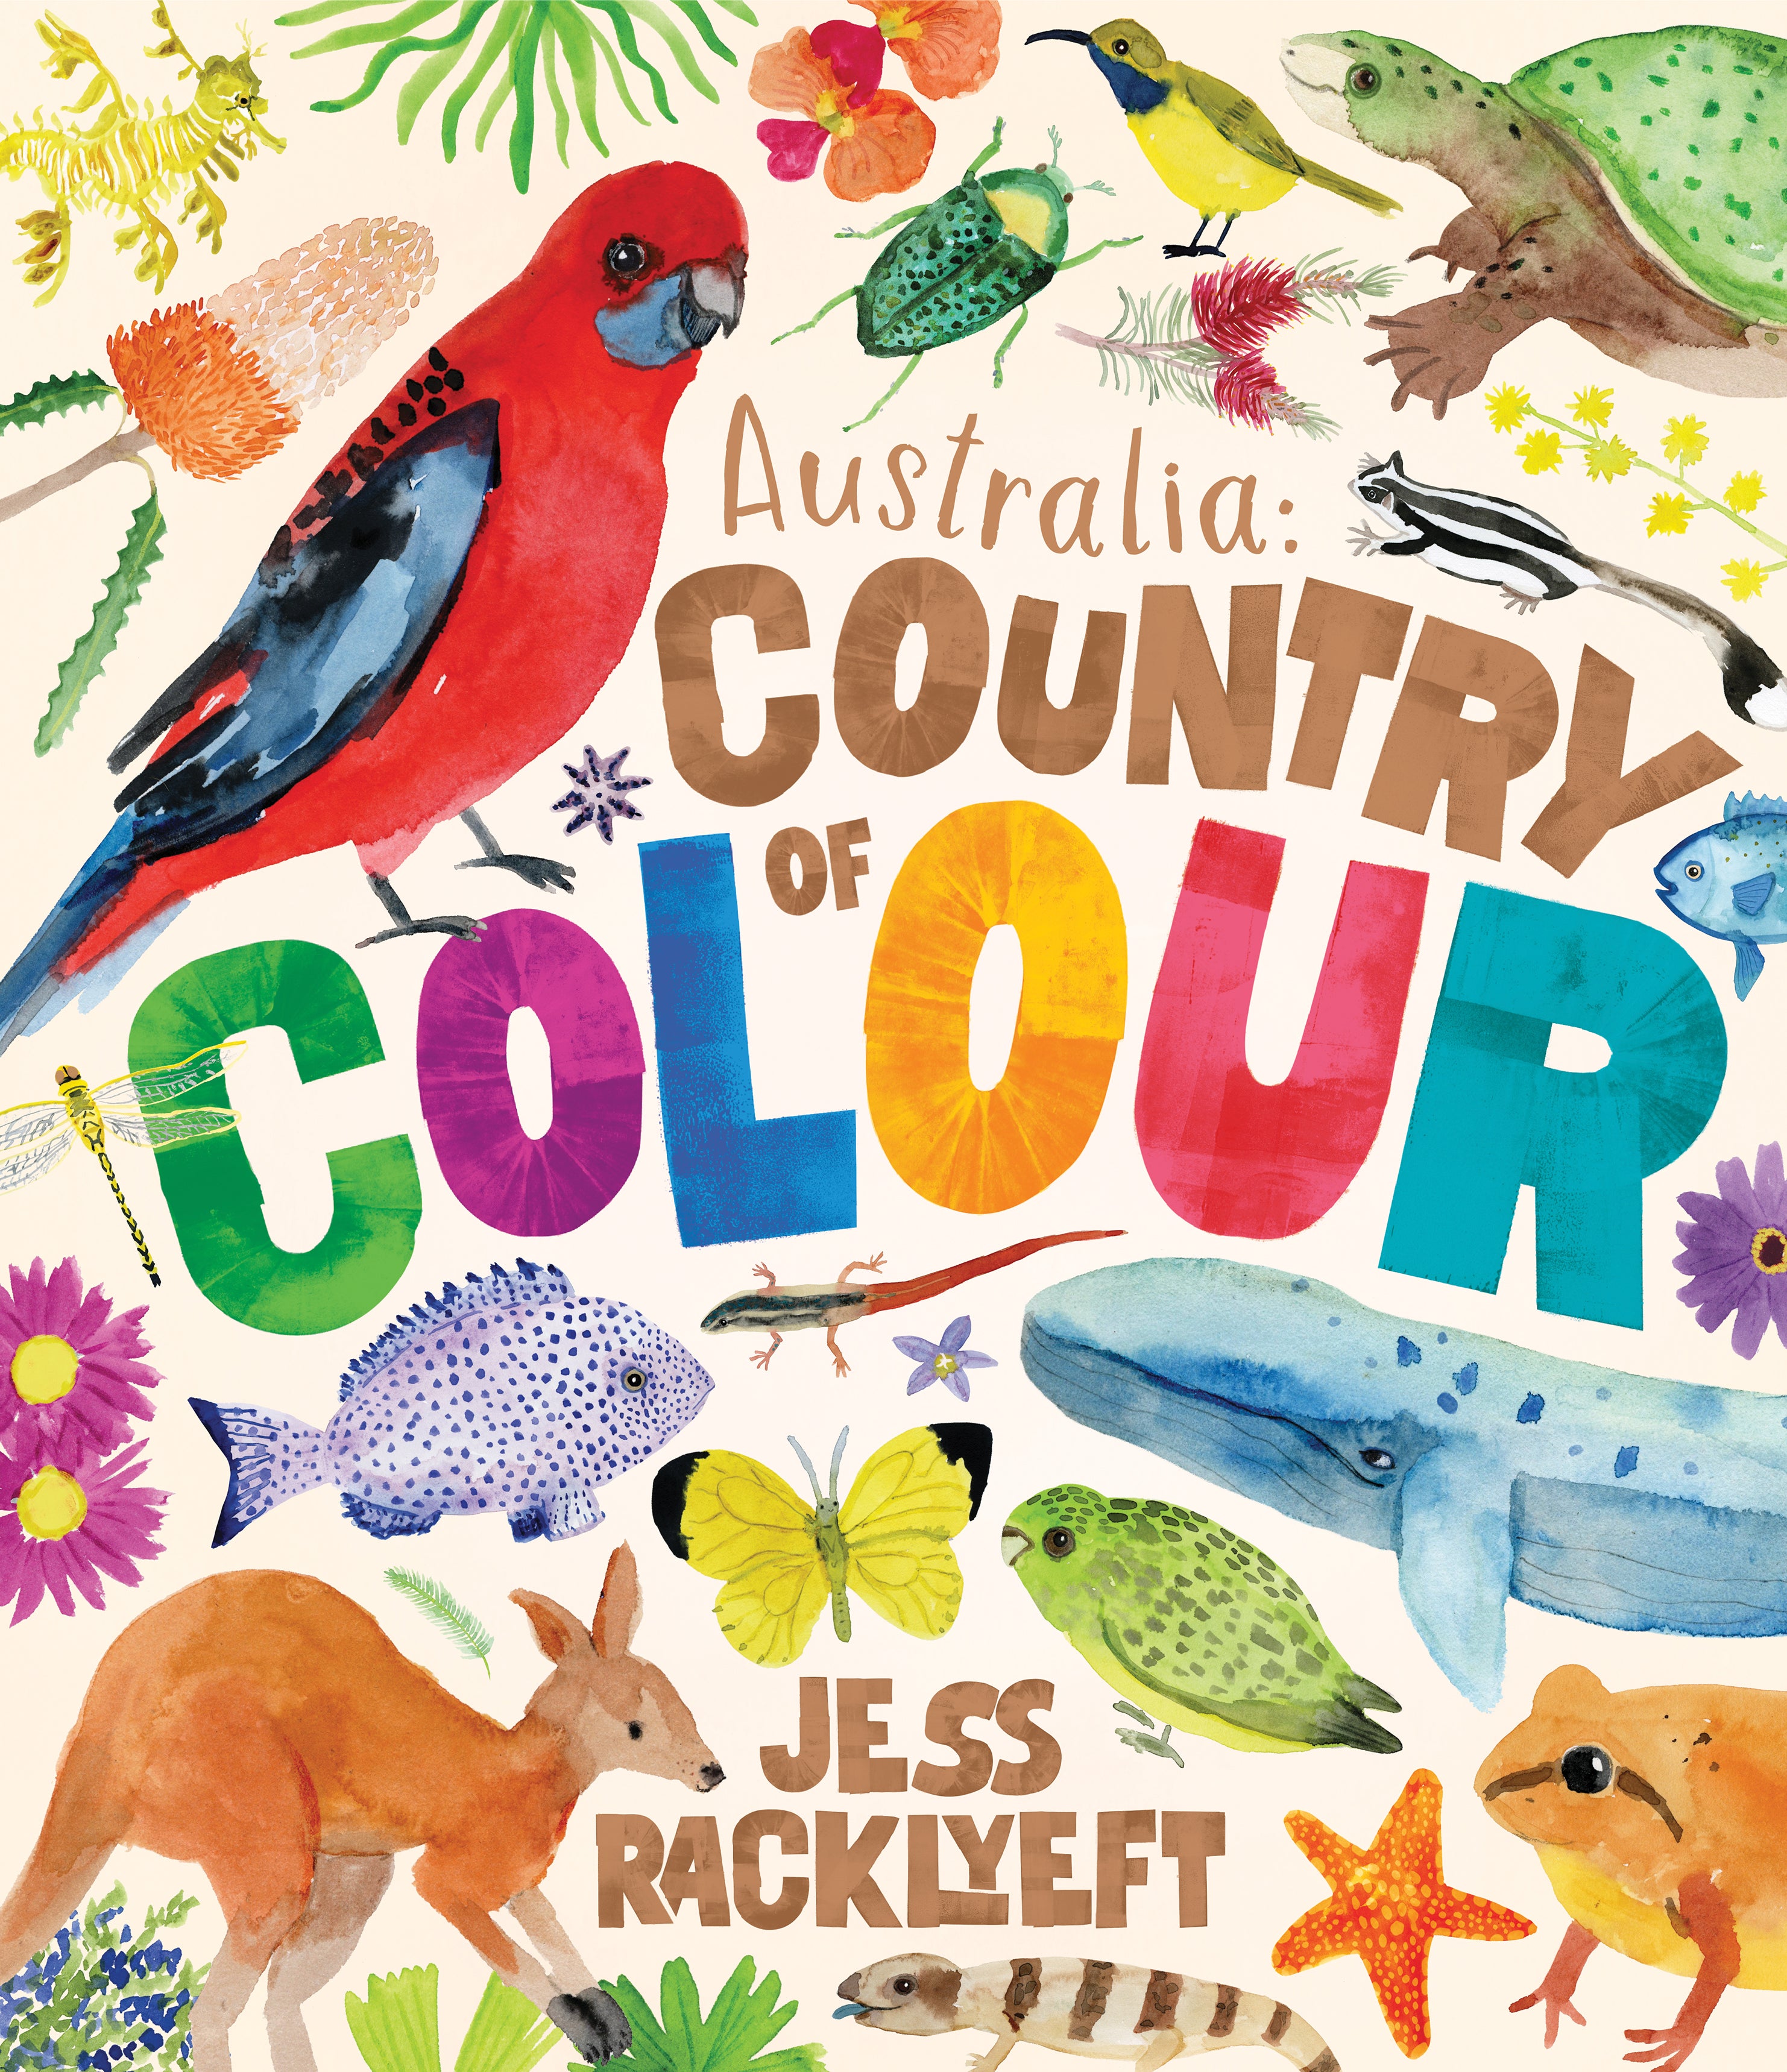 Australia: Country of Colour by Jess Racklyeft